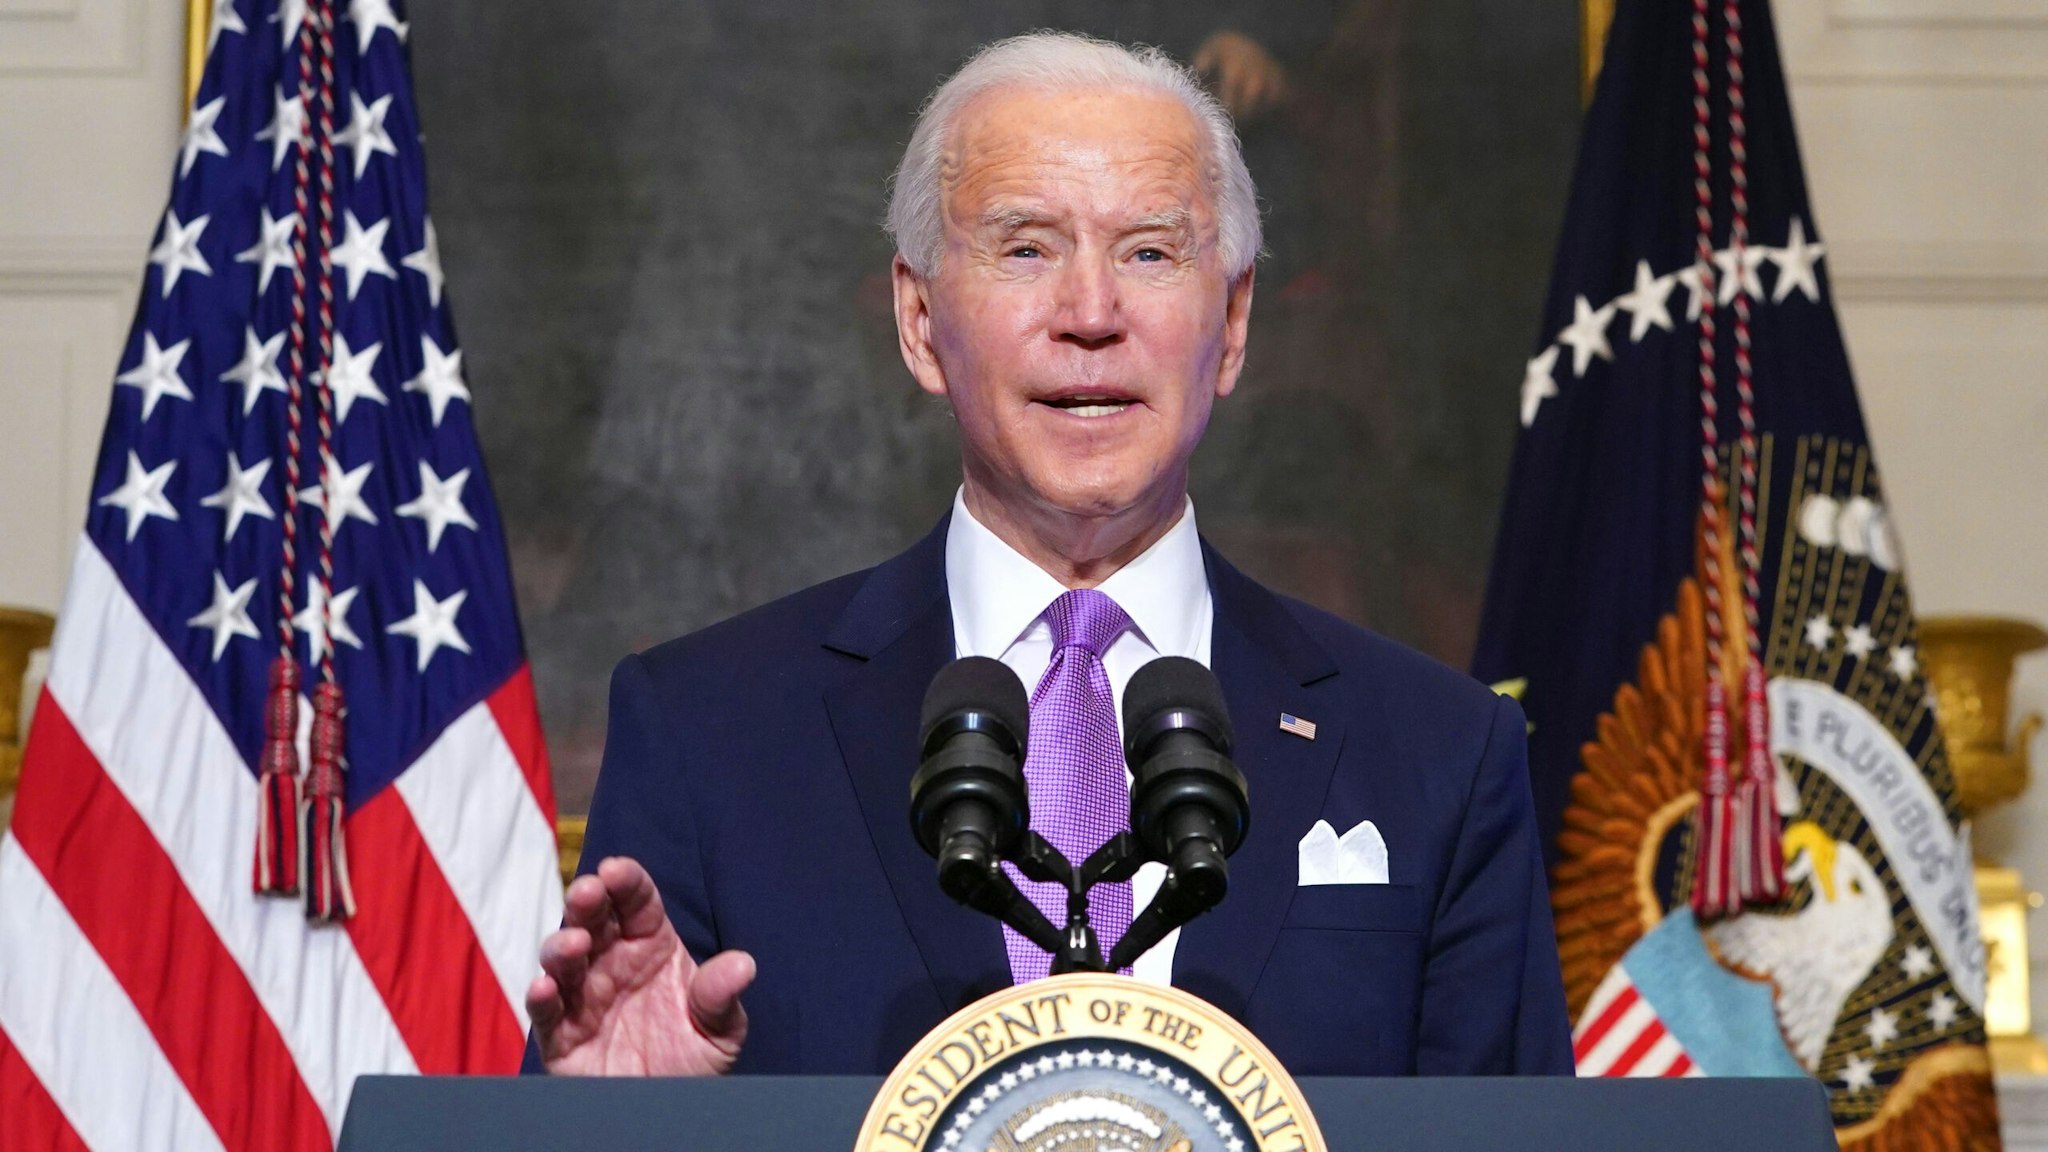 US President Joe Biden speaks on Covid-19 response in the State Dining Room of the White House in Washington, DC on January 26, 2021. - The number of confirmed coronavirus cases around the world on January 26 passed 100 million since the start of the pandemic, according to an AFP tally.